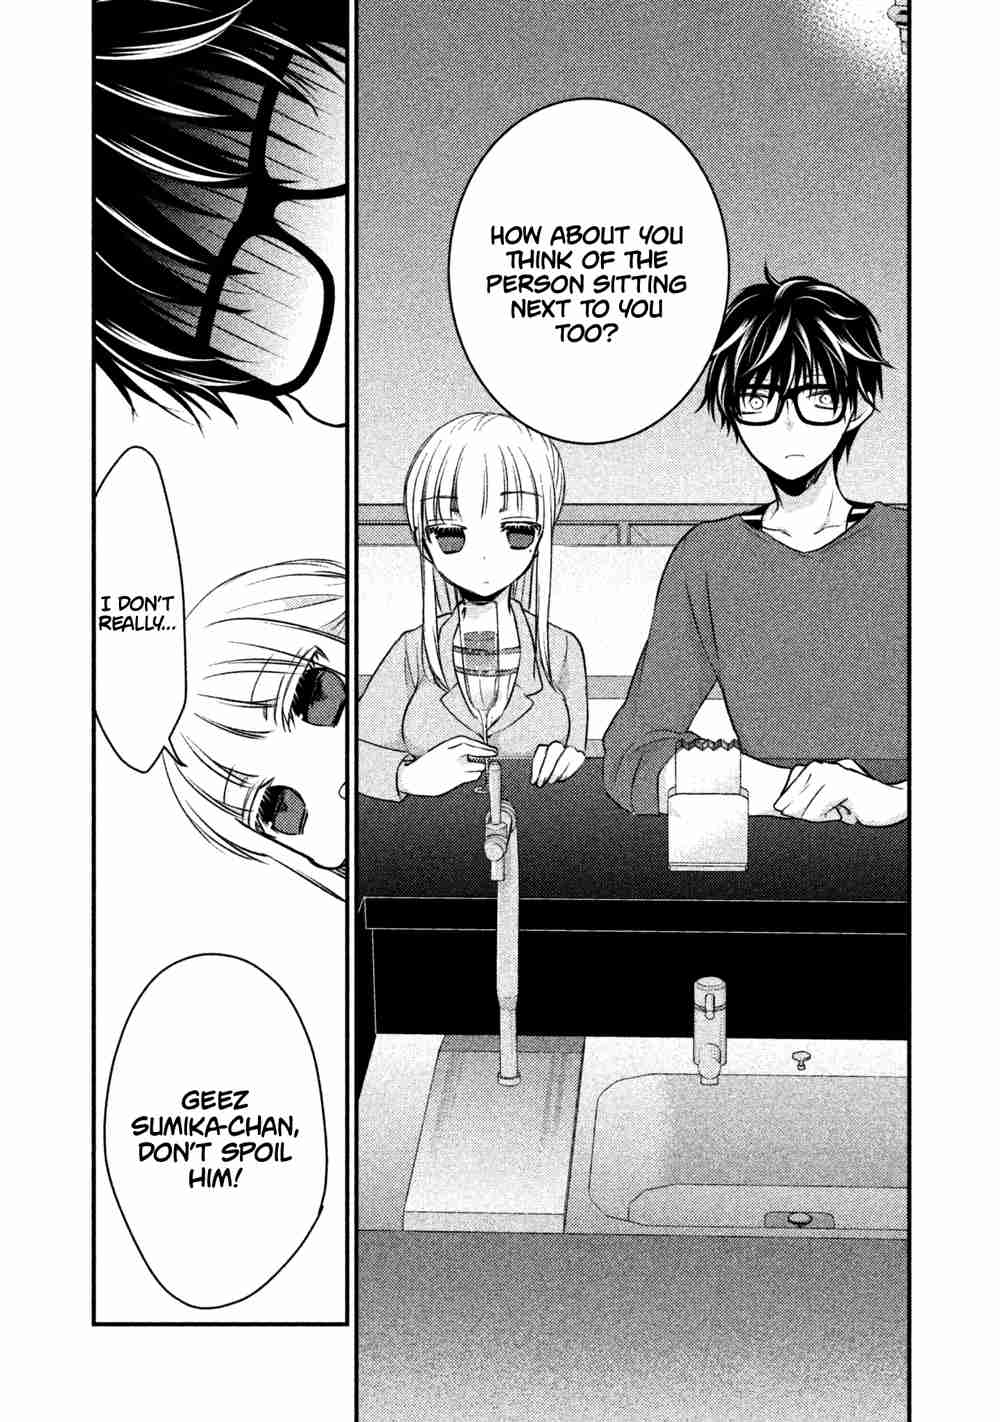 We May Be An Inexperienced Couple But... Vol. 2 Ch. 16 My Wife is Too Cute it Hurts